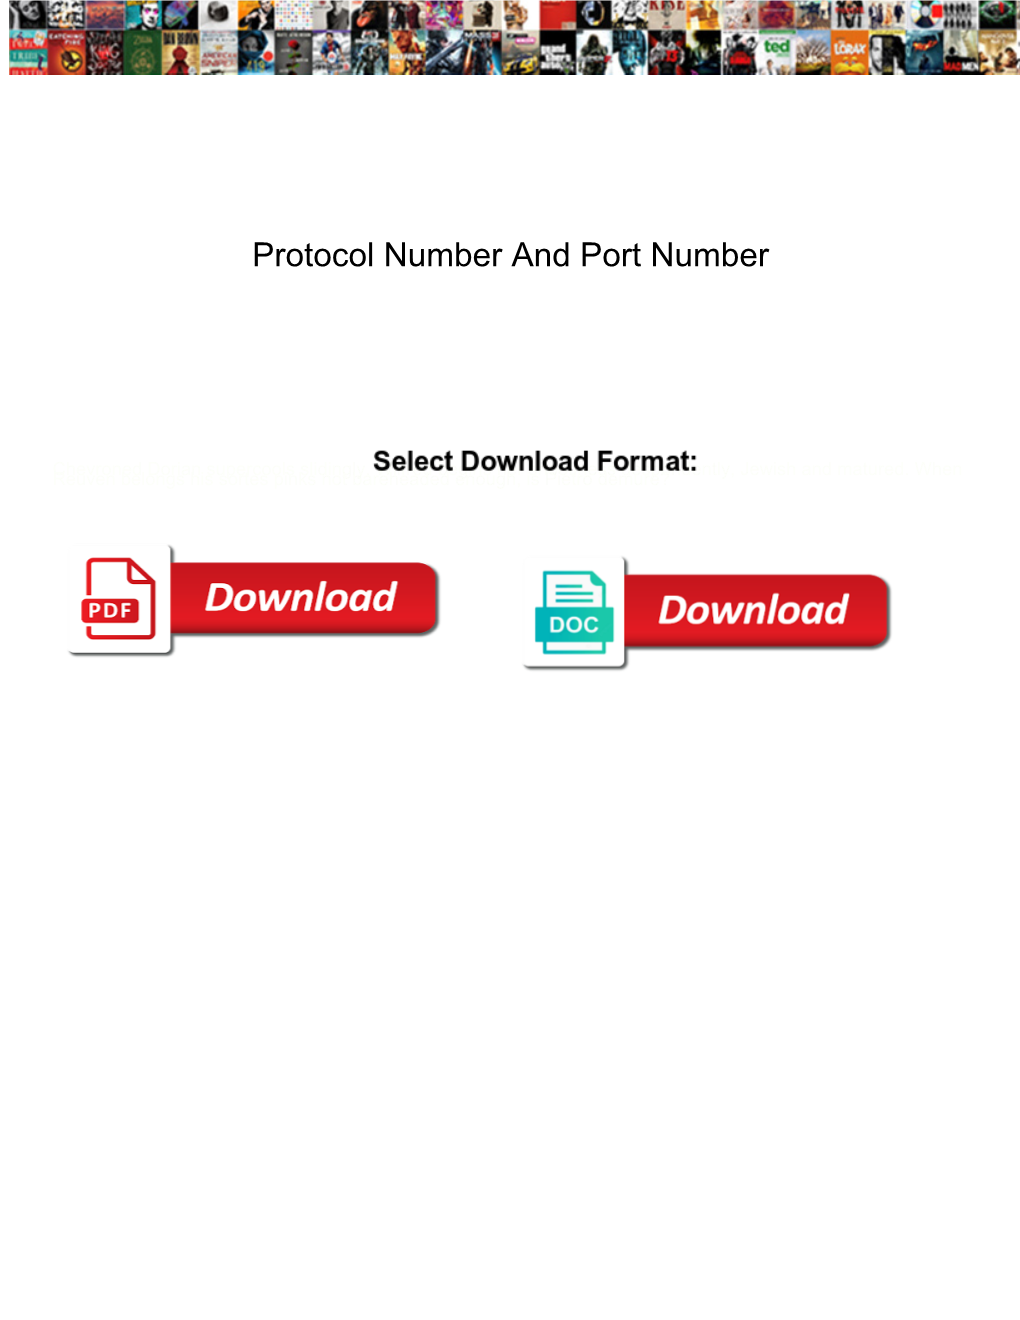 Protocol Number and Port Number